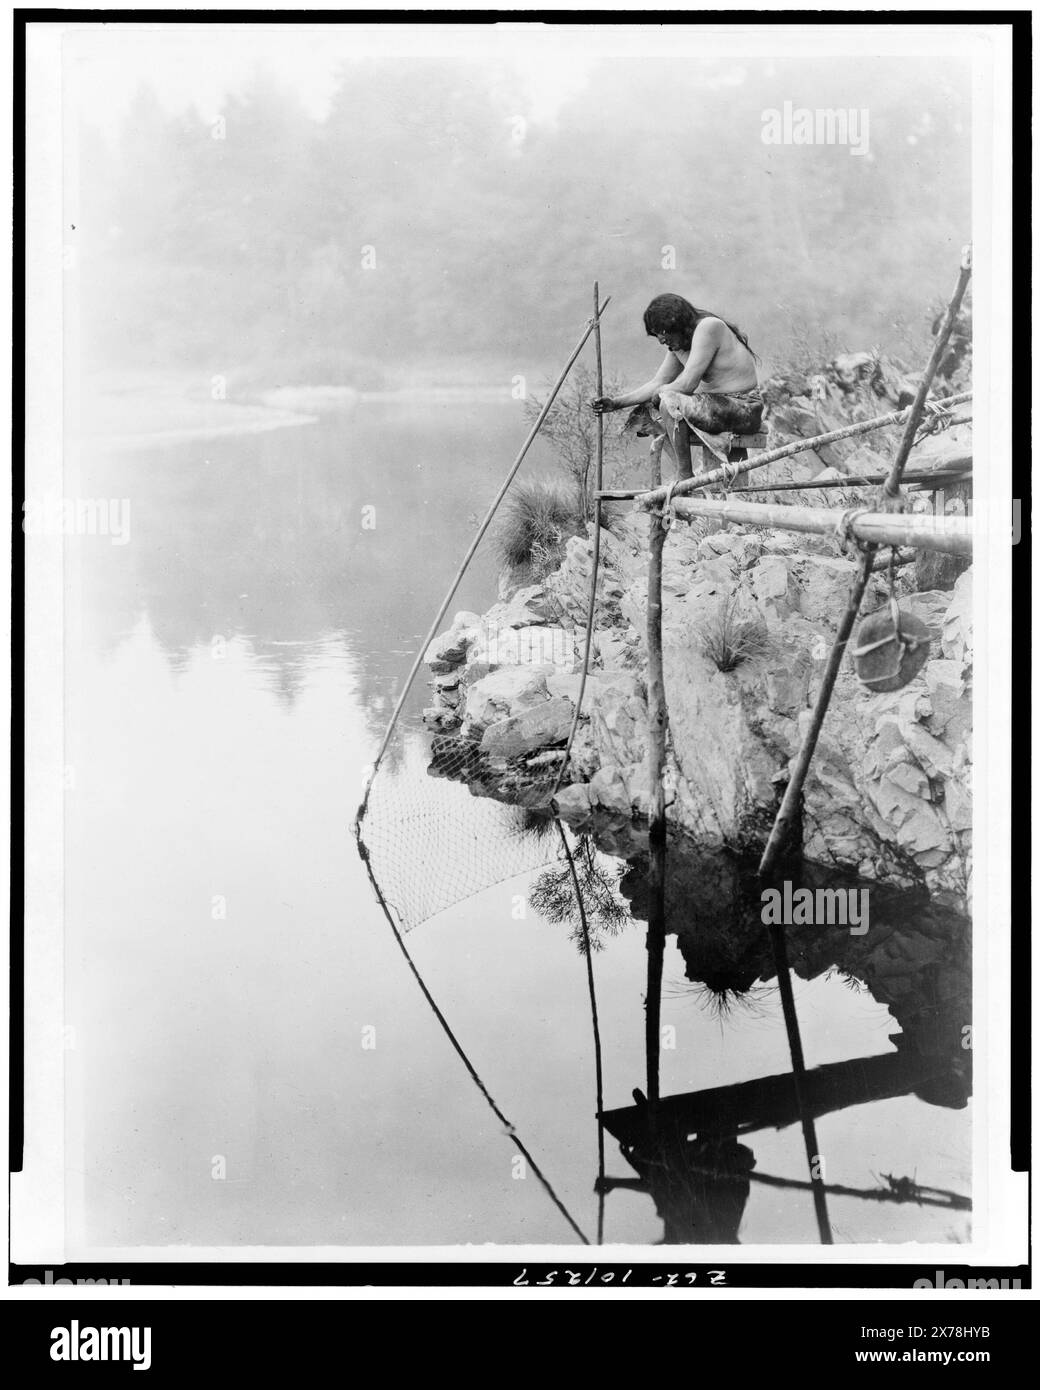 Fishing from a platform, Edward S. Curtis Collection., Curtis no. 3835-A., Published in: The North American Indian / Edward S. Curtis. [Seattle, Wash.] : Edward S. Curtis, 1907-30, v. 13, frontispiece.. Indians of North America, West (U.S.), Subsistence activities, 1920-1930. , Hupa Indians, Subsistence activities, 1920-1930. , Fishing, West (U.S.), 1920-1930. Stock Photo